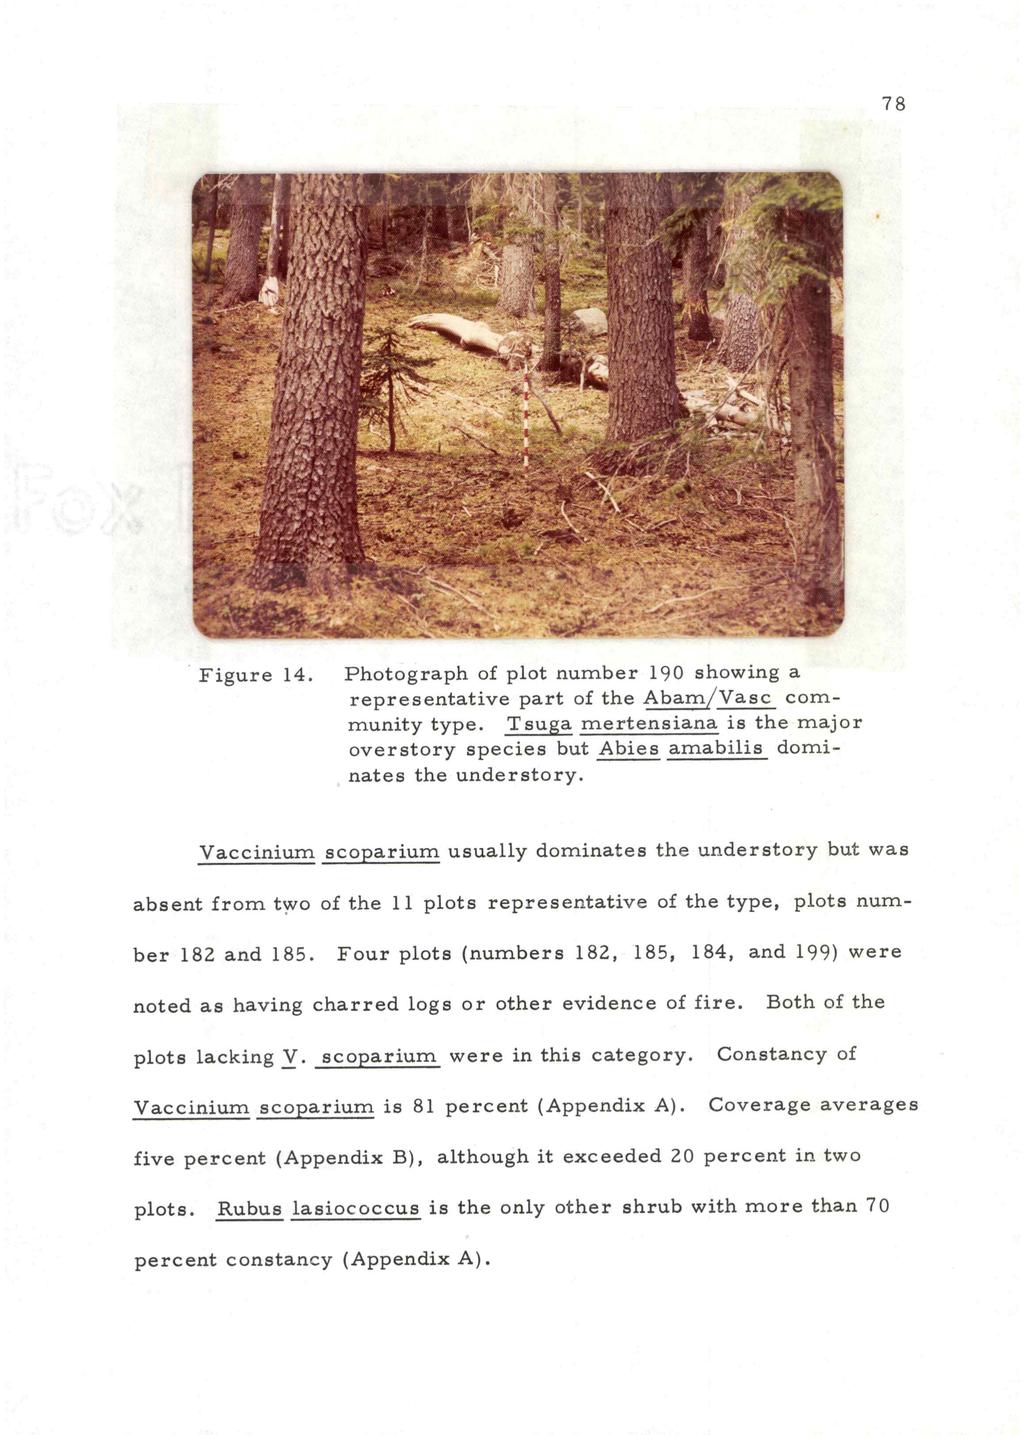 78 Figure 14. Photograph of plot number 190 showing a representative part of the Abam/Vasc community type. Tsuga mertensiana is the major overstory species but Abies amabilis dominates the understory.